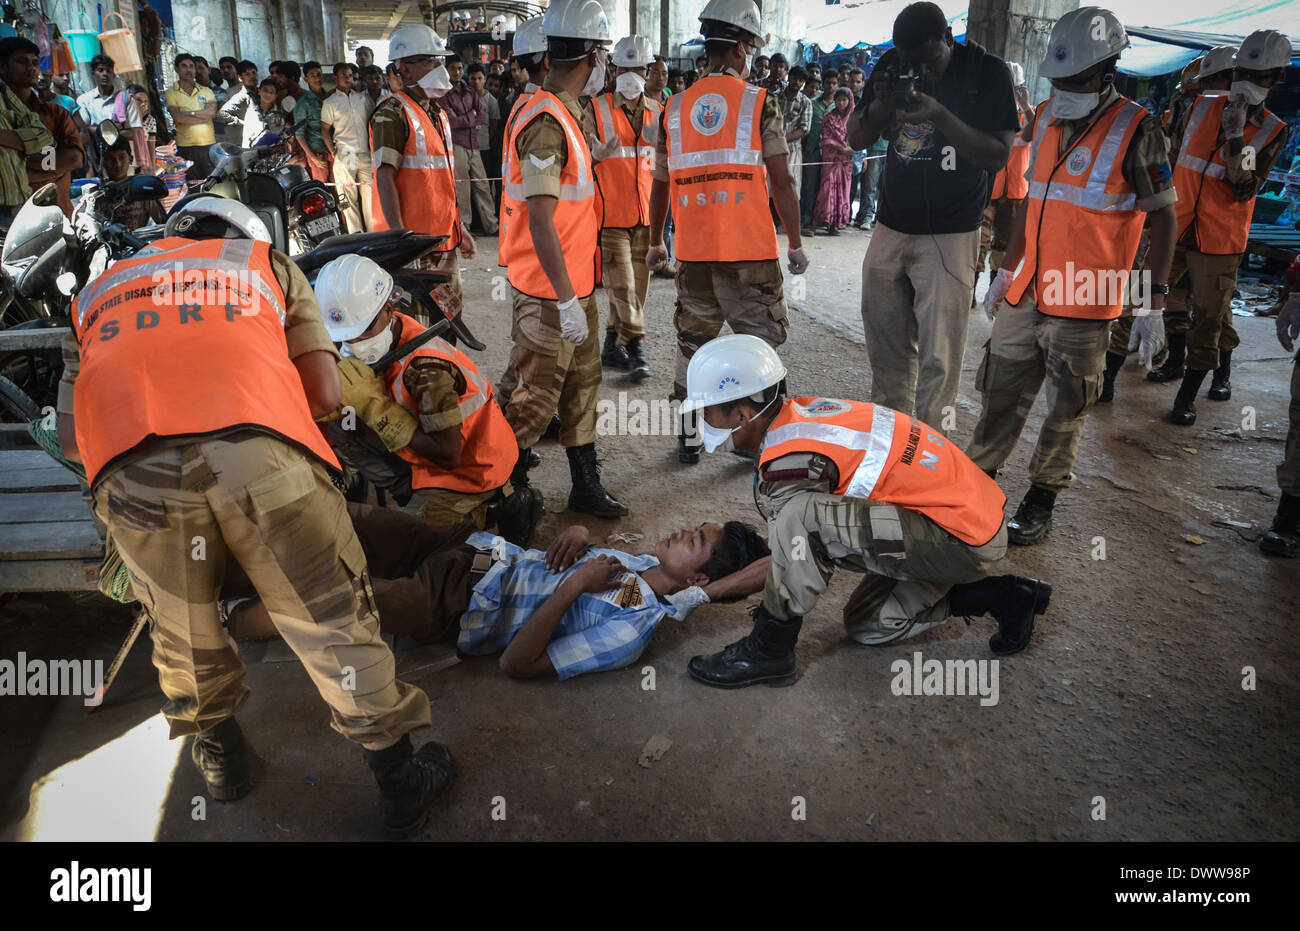 Dimapur, India. 13th Mar, 2014. Nagaland State Disaster Response Force (NSDRF) put out a man pretending to be injured as onlookers watch during an earthquake mock drill in Dimapur, India north eastern state of Nagaland on Thursday, March 13, 2014. The entire north east India are exercising earthquake mock drill, also one of the biggest mock drill in South East Asia aiming to assess multi-state disaster preparedness, for the fear of 1897's 8.7 magnitude Shillong earthquake replication. Credit:  ZUMA Press, Inc./Alamy Live News Stock Photo